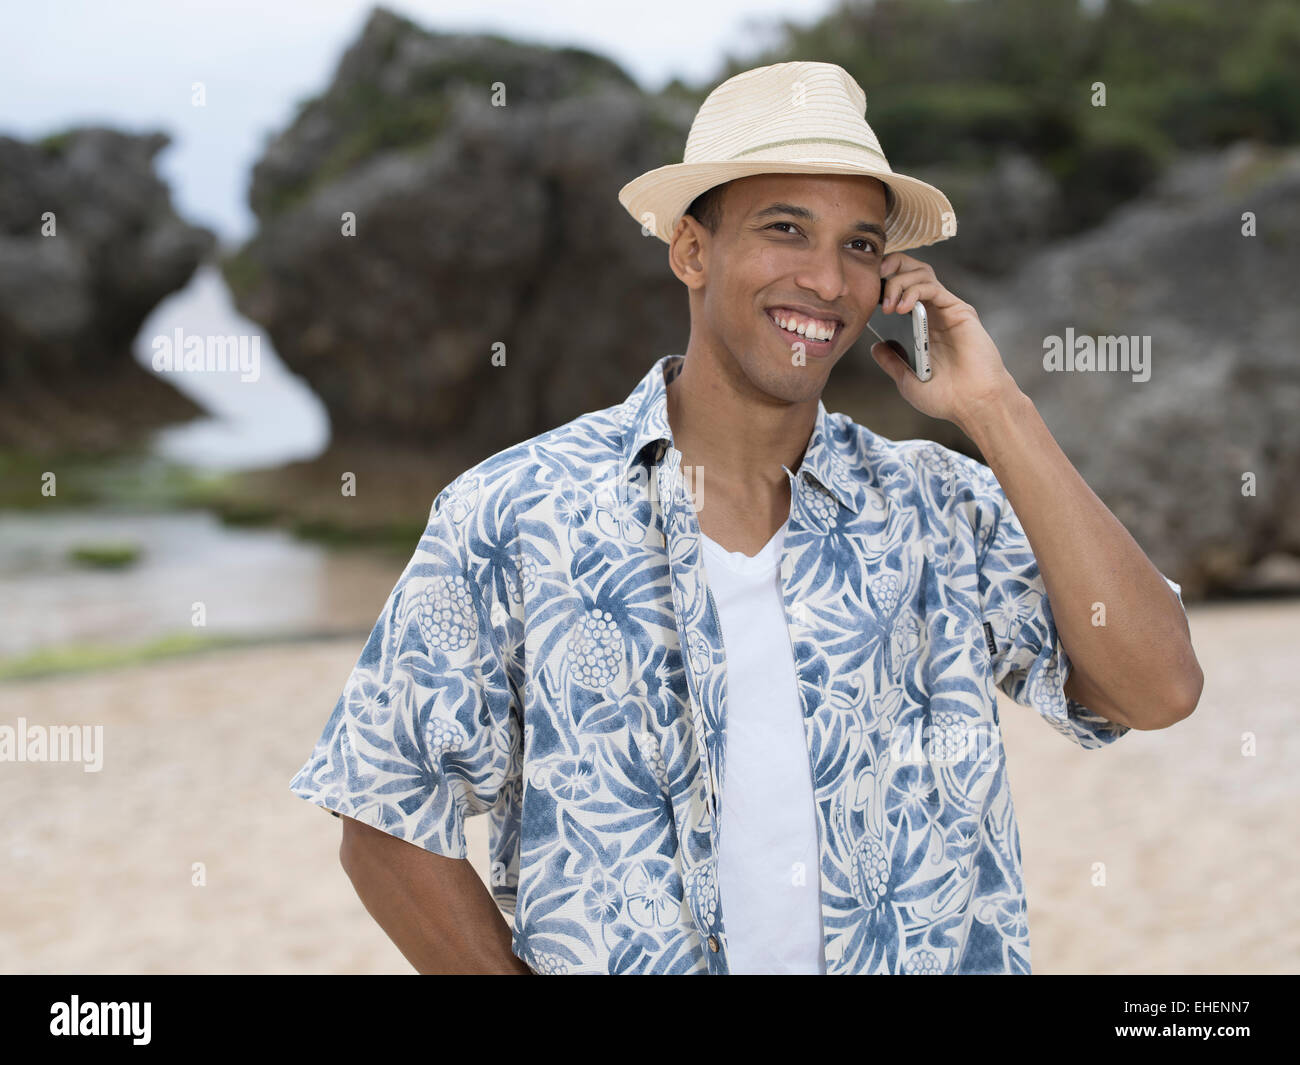 Man calling / telephoning with Apple iphone 6 smartphone while at the beach Stock Photo